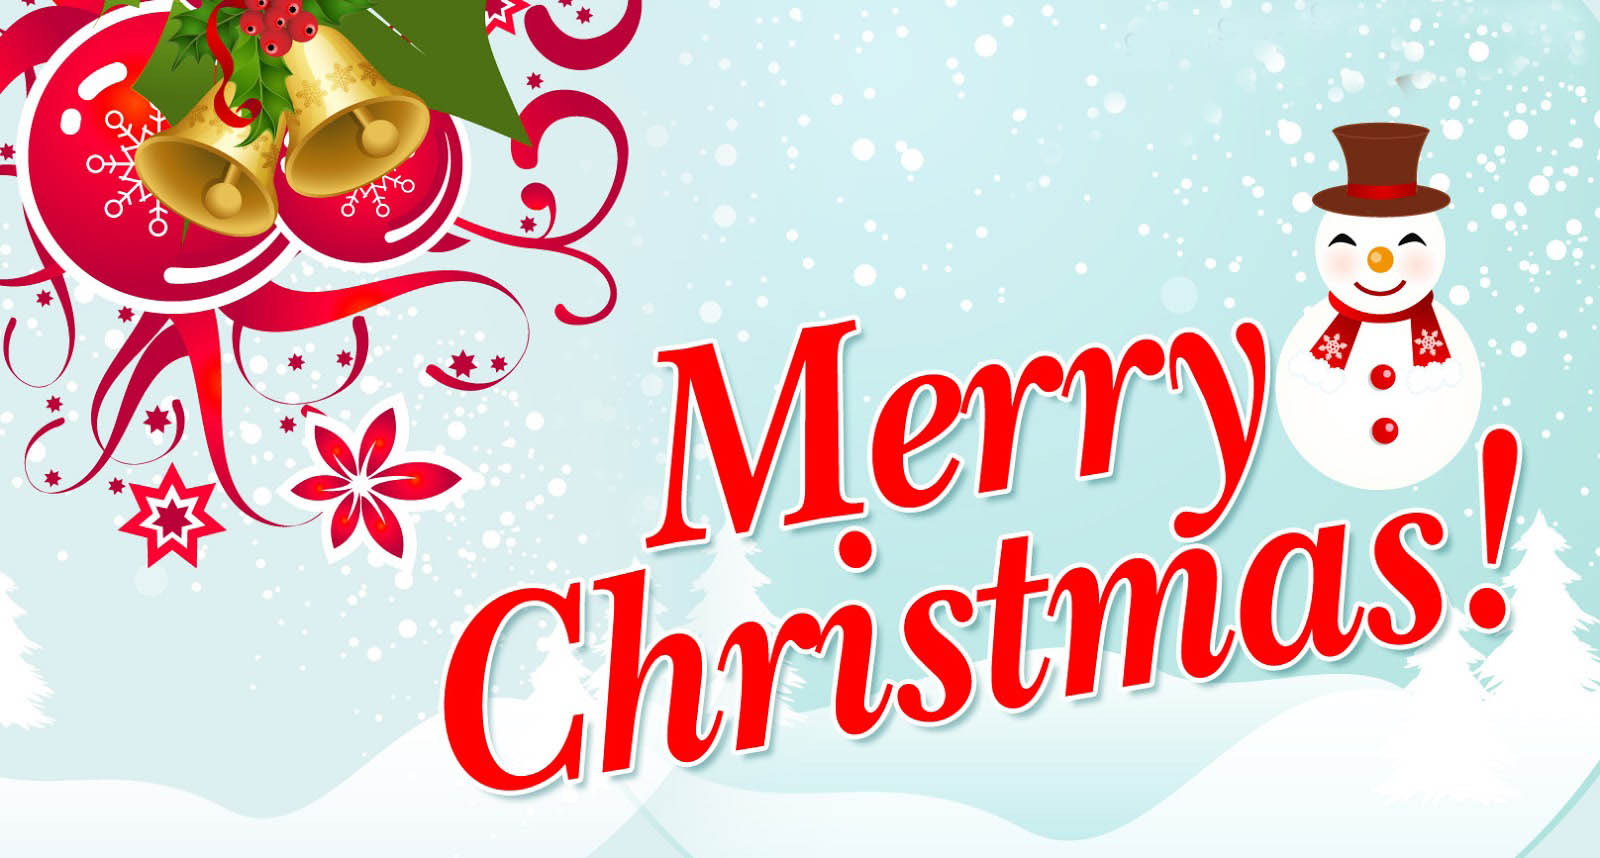 Cute Merry Christmas Wallpaper Download - Happy Christmas Merry Christmas - HD Wallpaper 